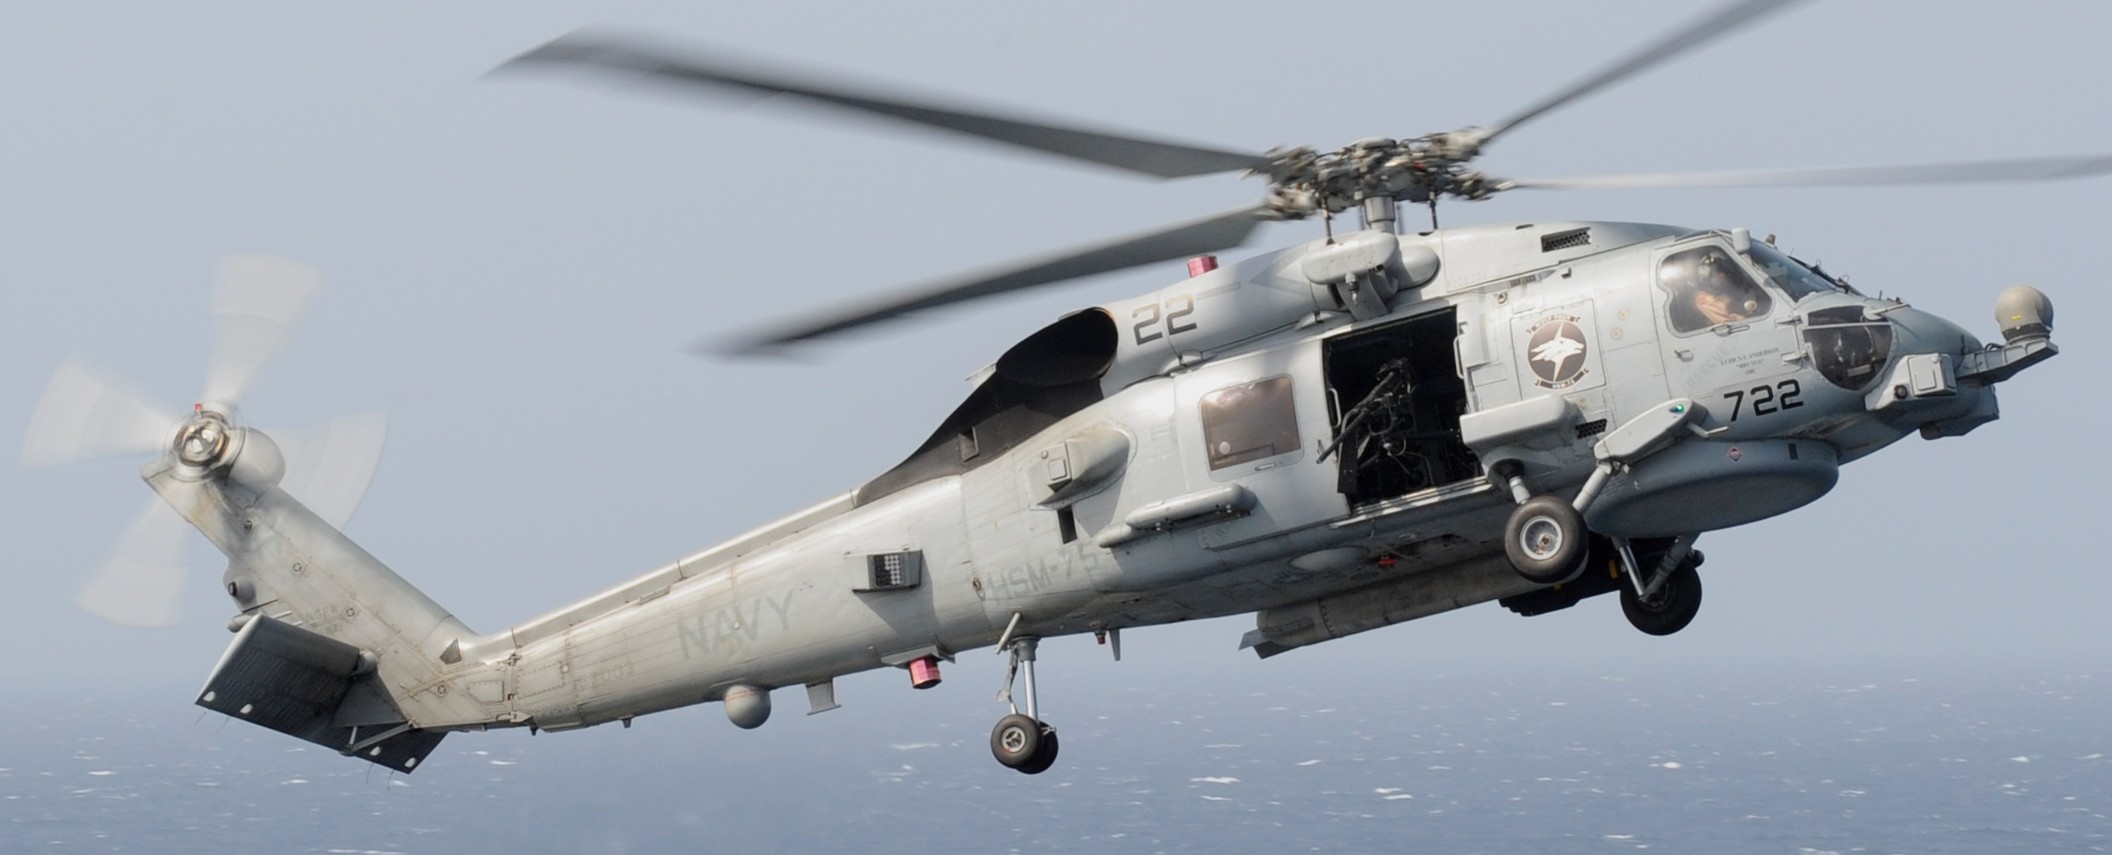 hsm-75 wolfpack helicopter maritime strike squadron us navy mh-60r seahawk 2013 21